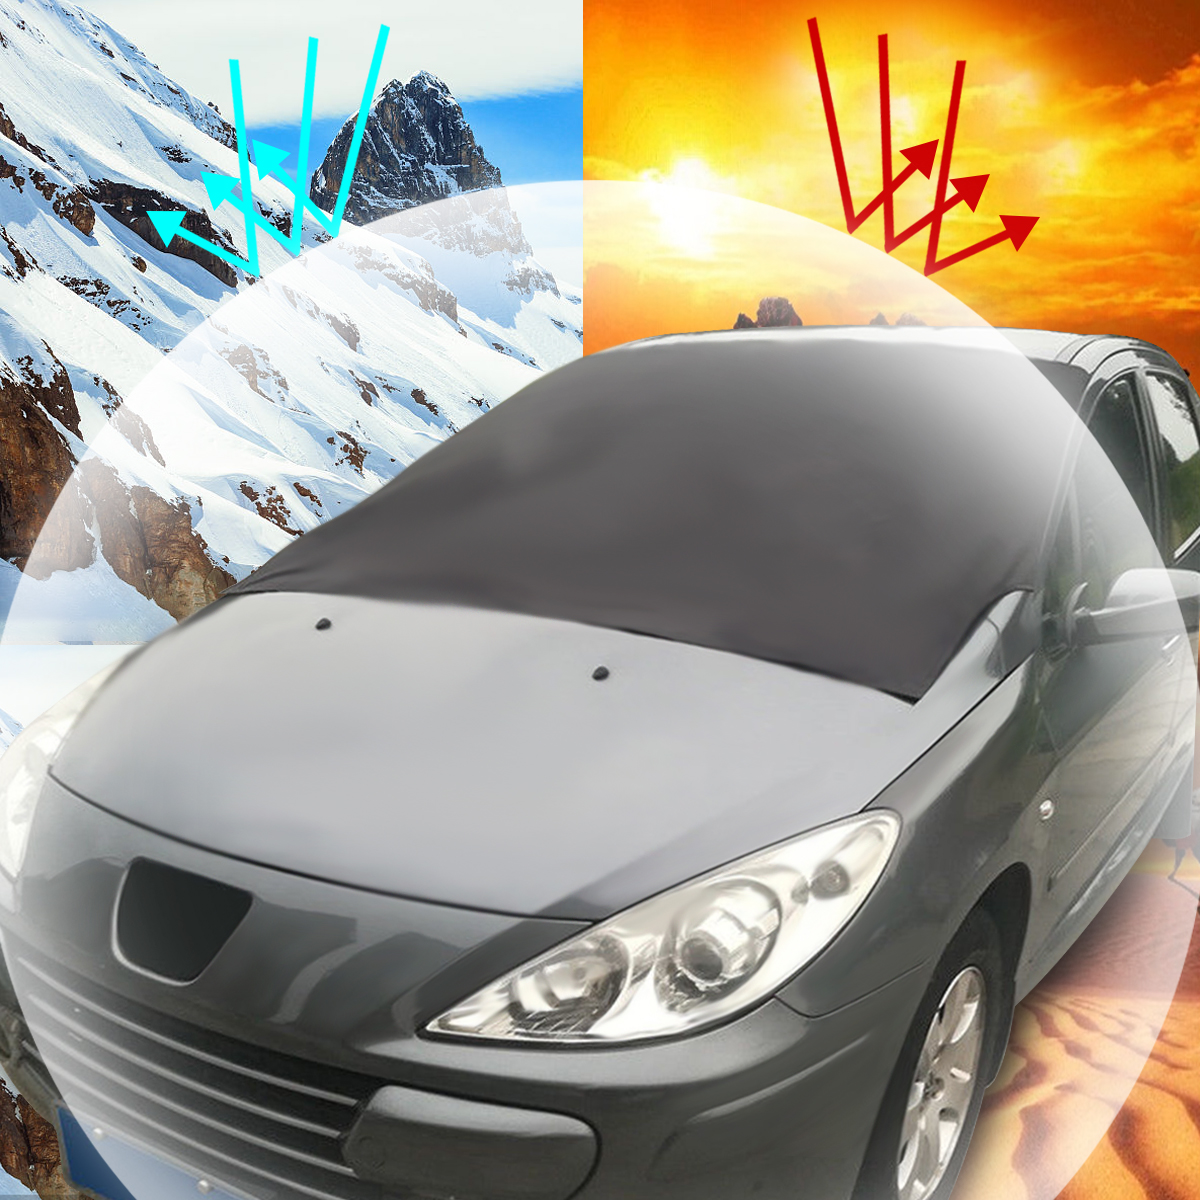 Outdoor-Travel-Car-Sunshade-SUV-Magnet-Windshield-Cover-Sun-Shield-Snow-Ice-Sun-Frost-Portector-1279761-1